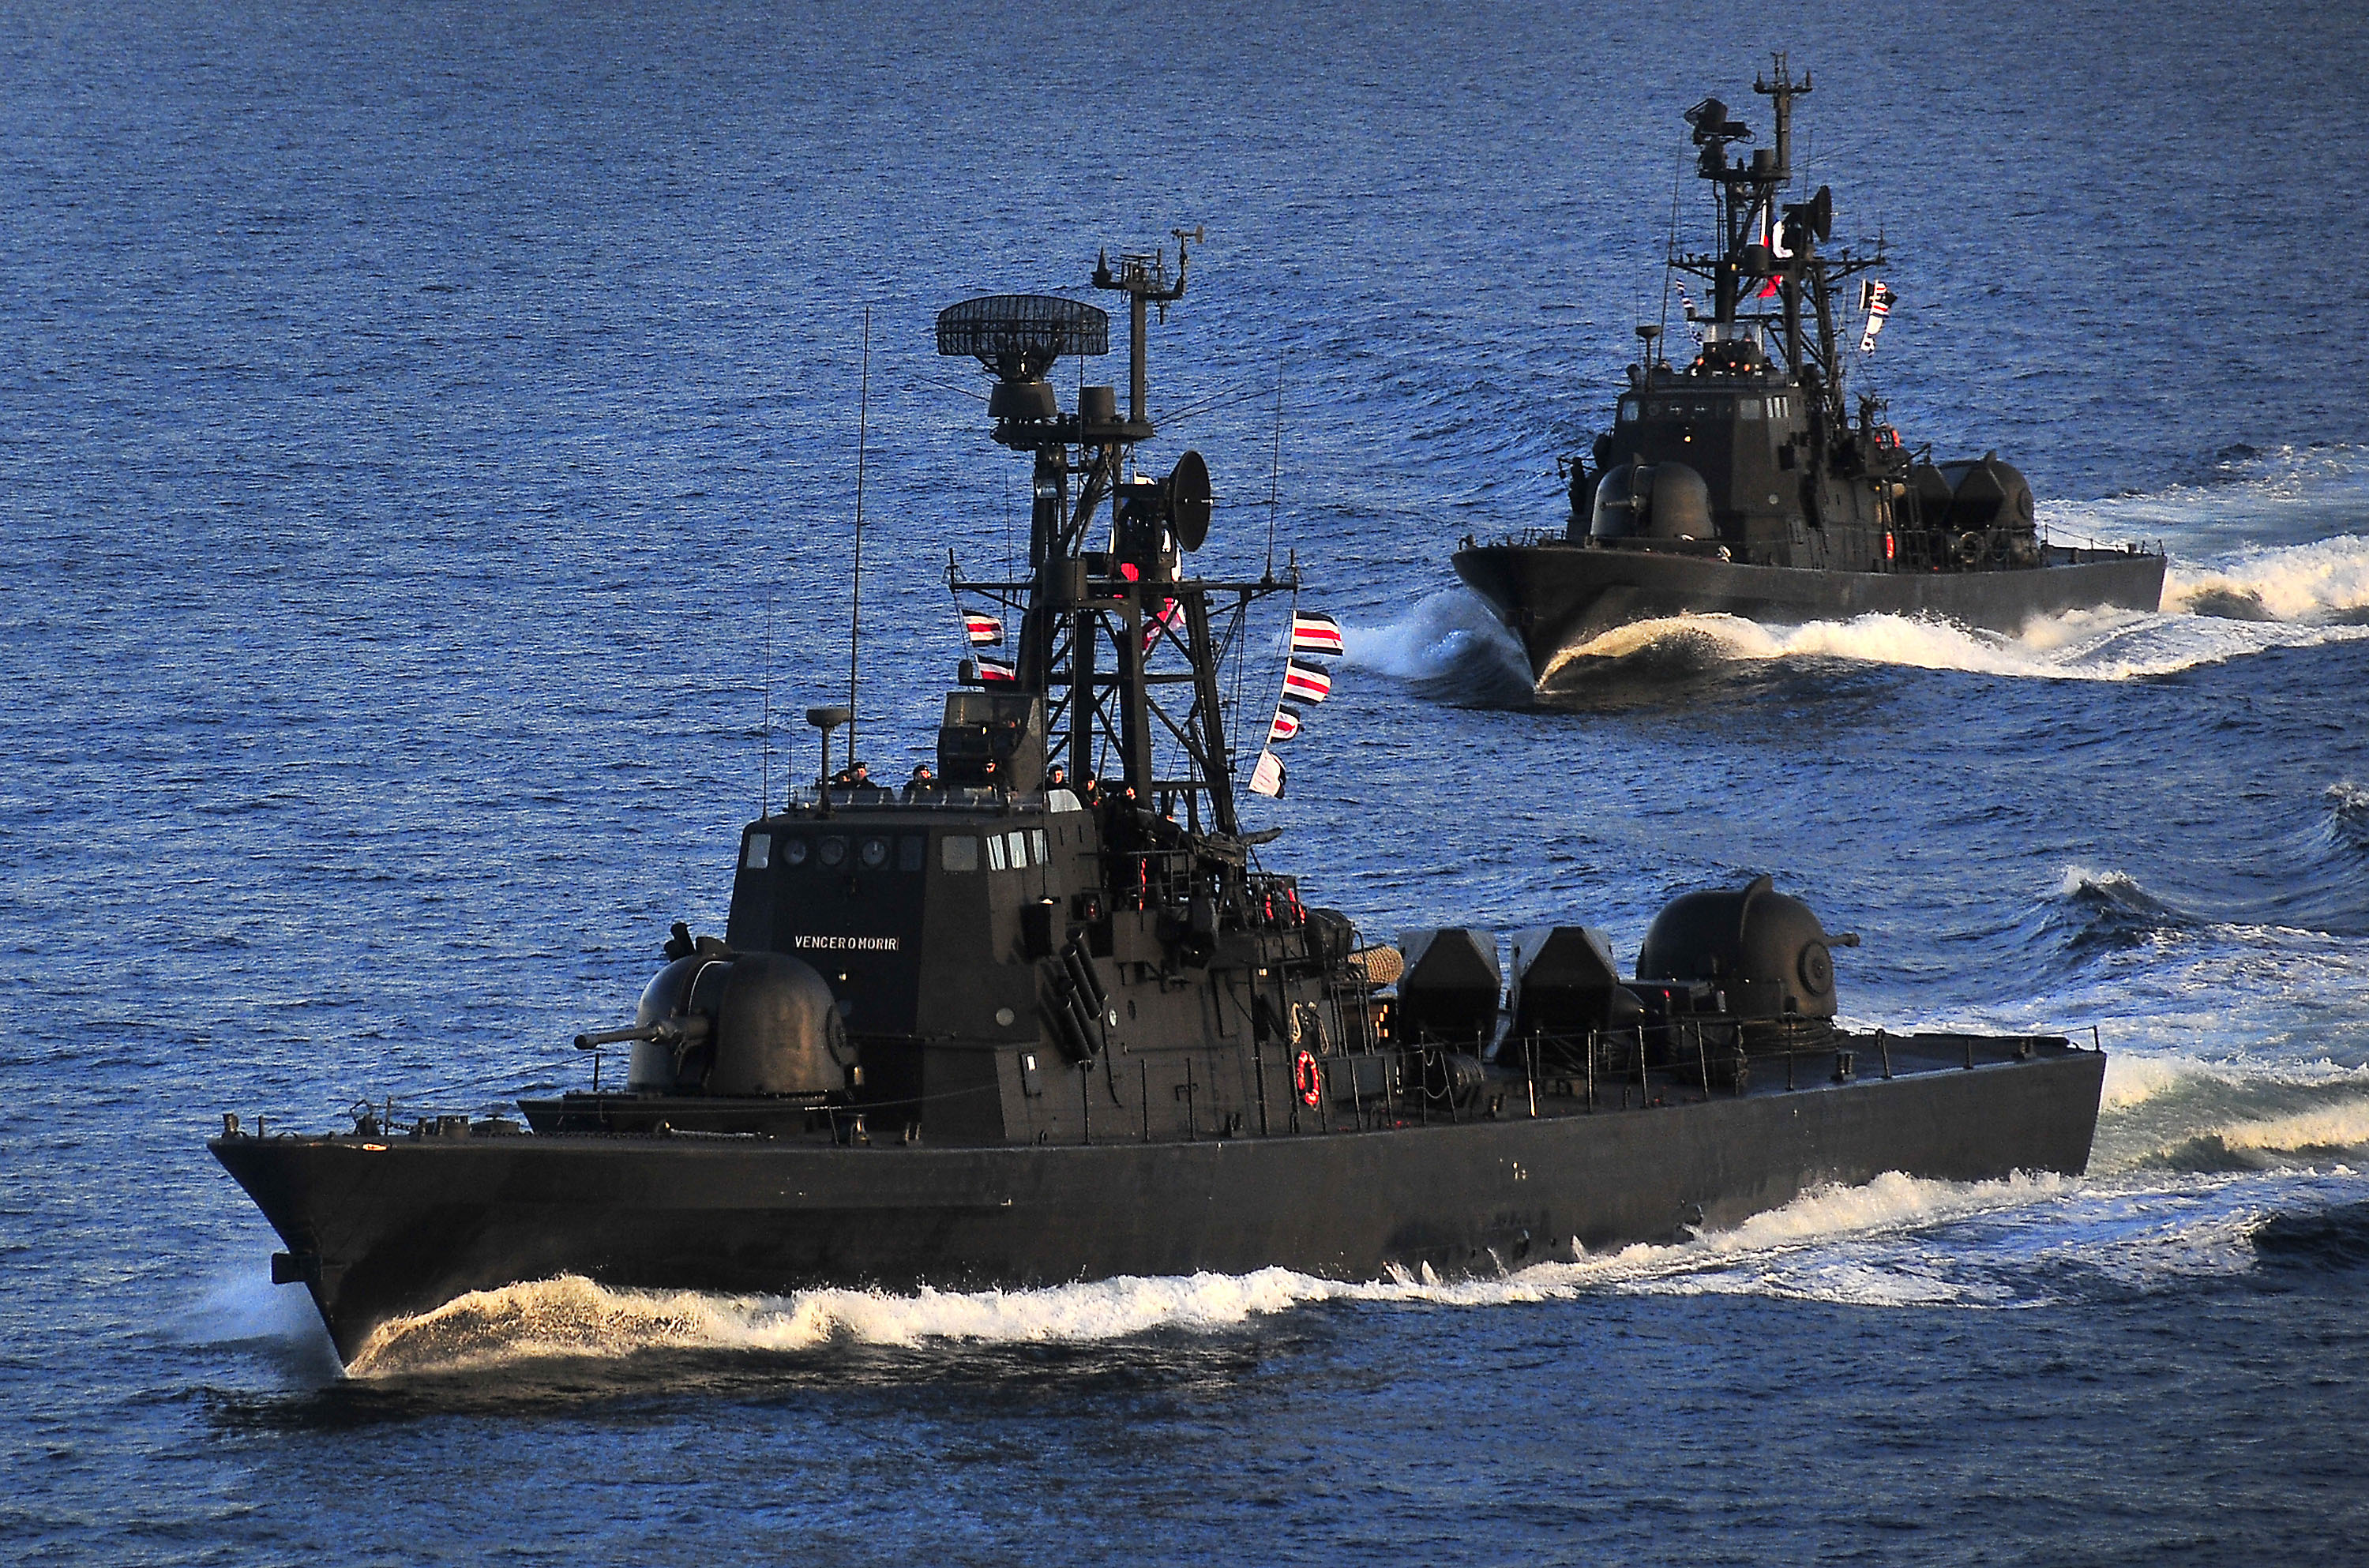 US_Navy_100315-N-4774B-200_The_Chilean_navy_Sa%27ar_4-class_fast-attack_craft_Angamos_and_Casma_perform_tactical_maneuvering_exercises_in_the_Strait_Of_Magellan.jpg